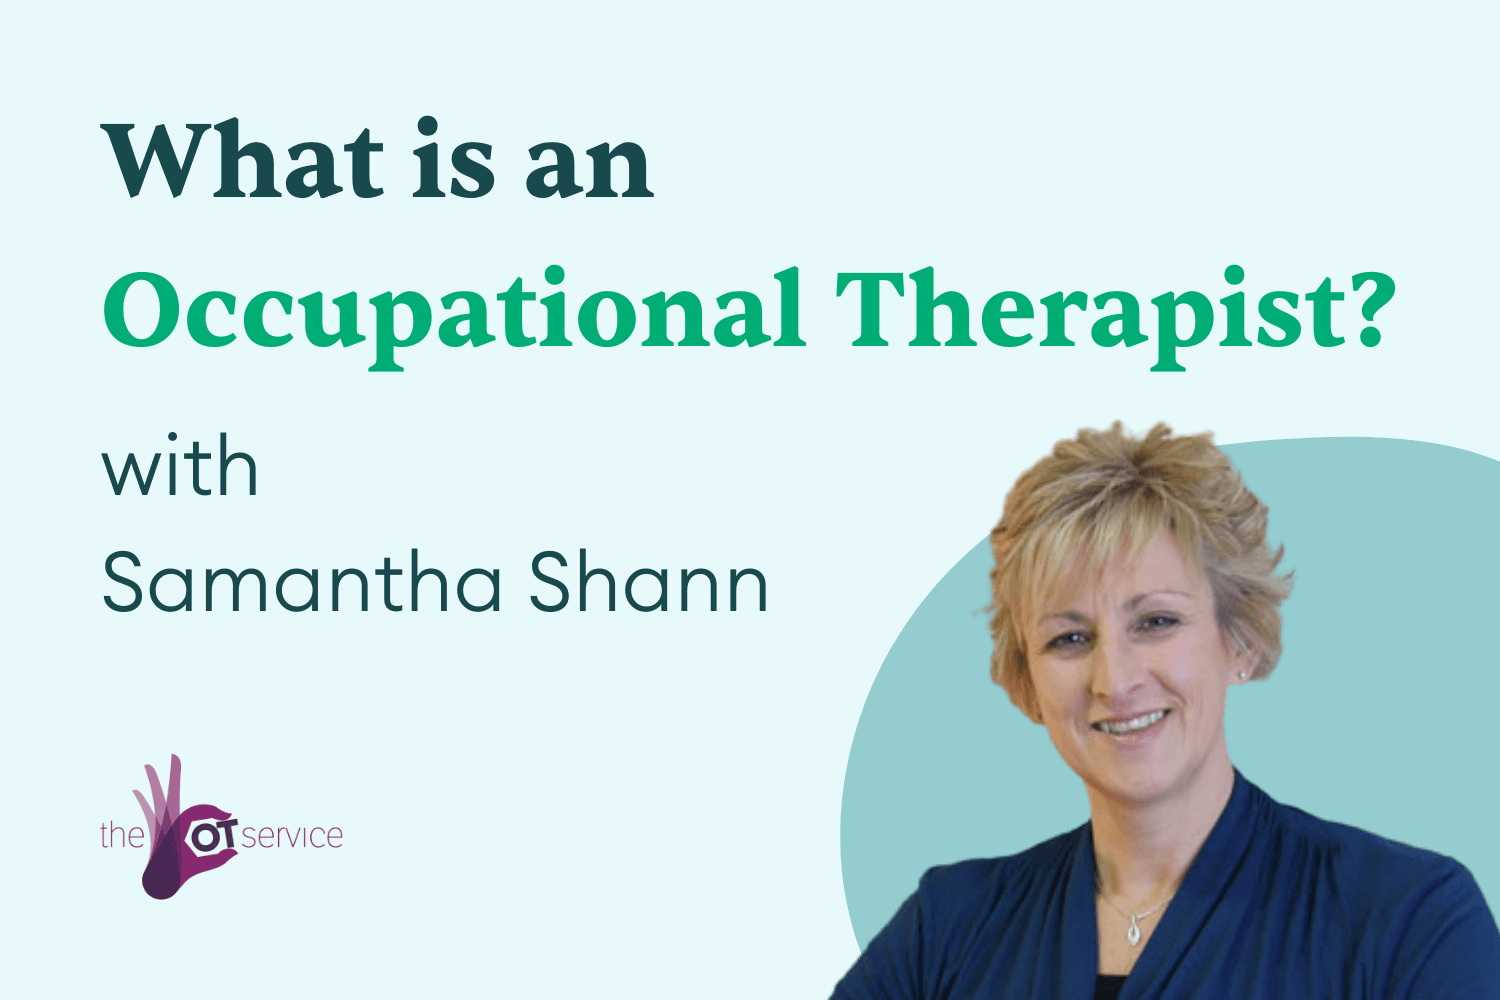 What is an Occupational Therapist